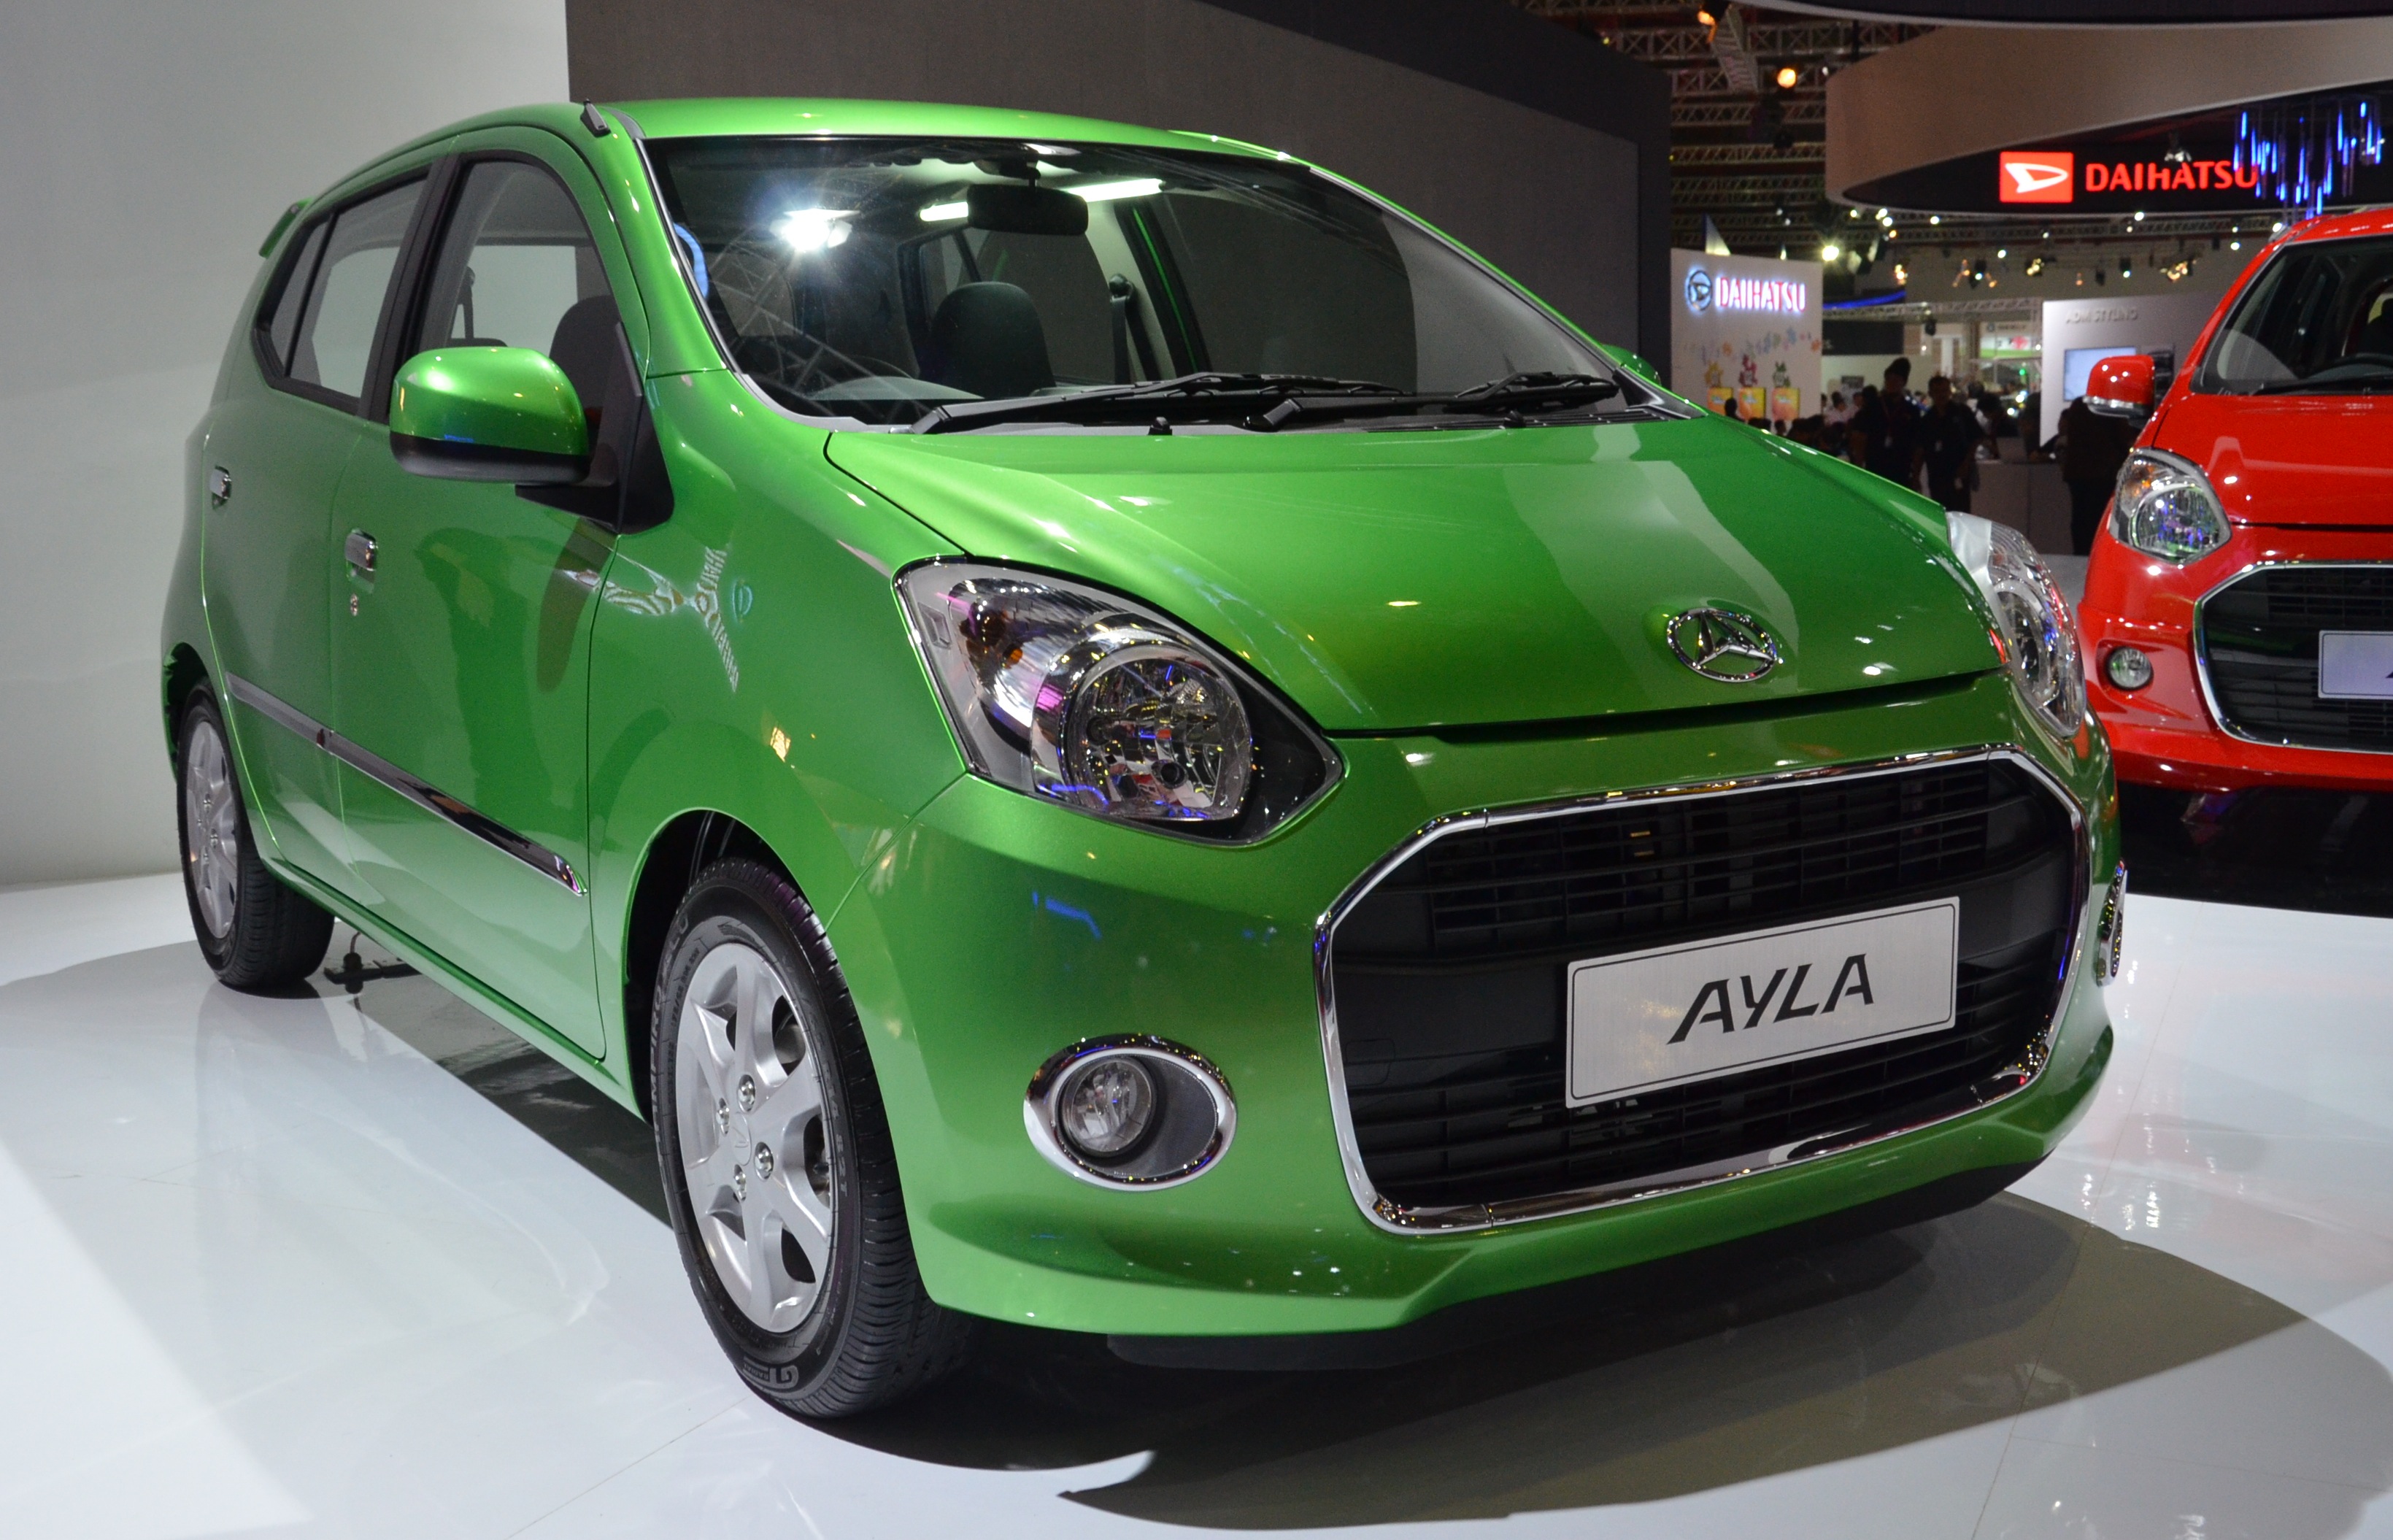 Daihatsu Ayla 1.0L ecocar launched in Indonesia